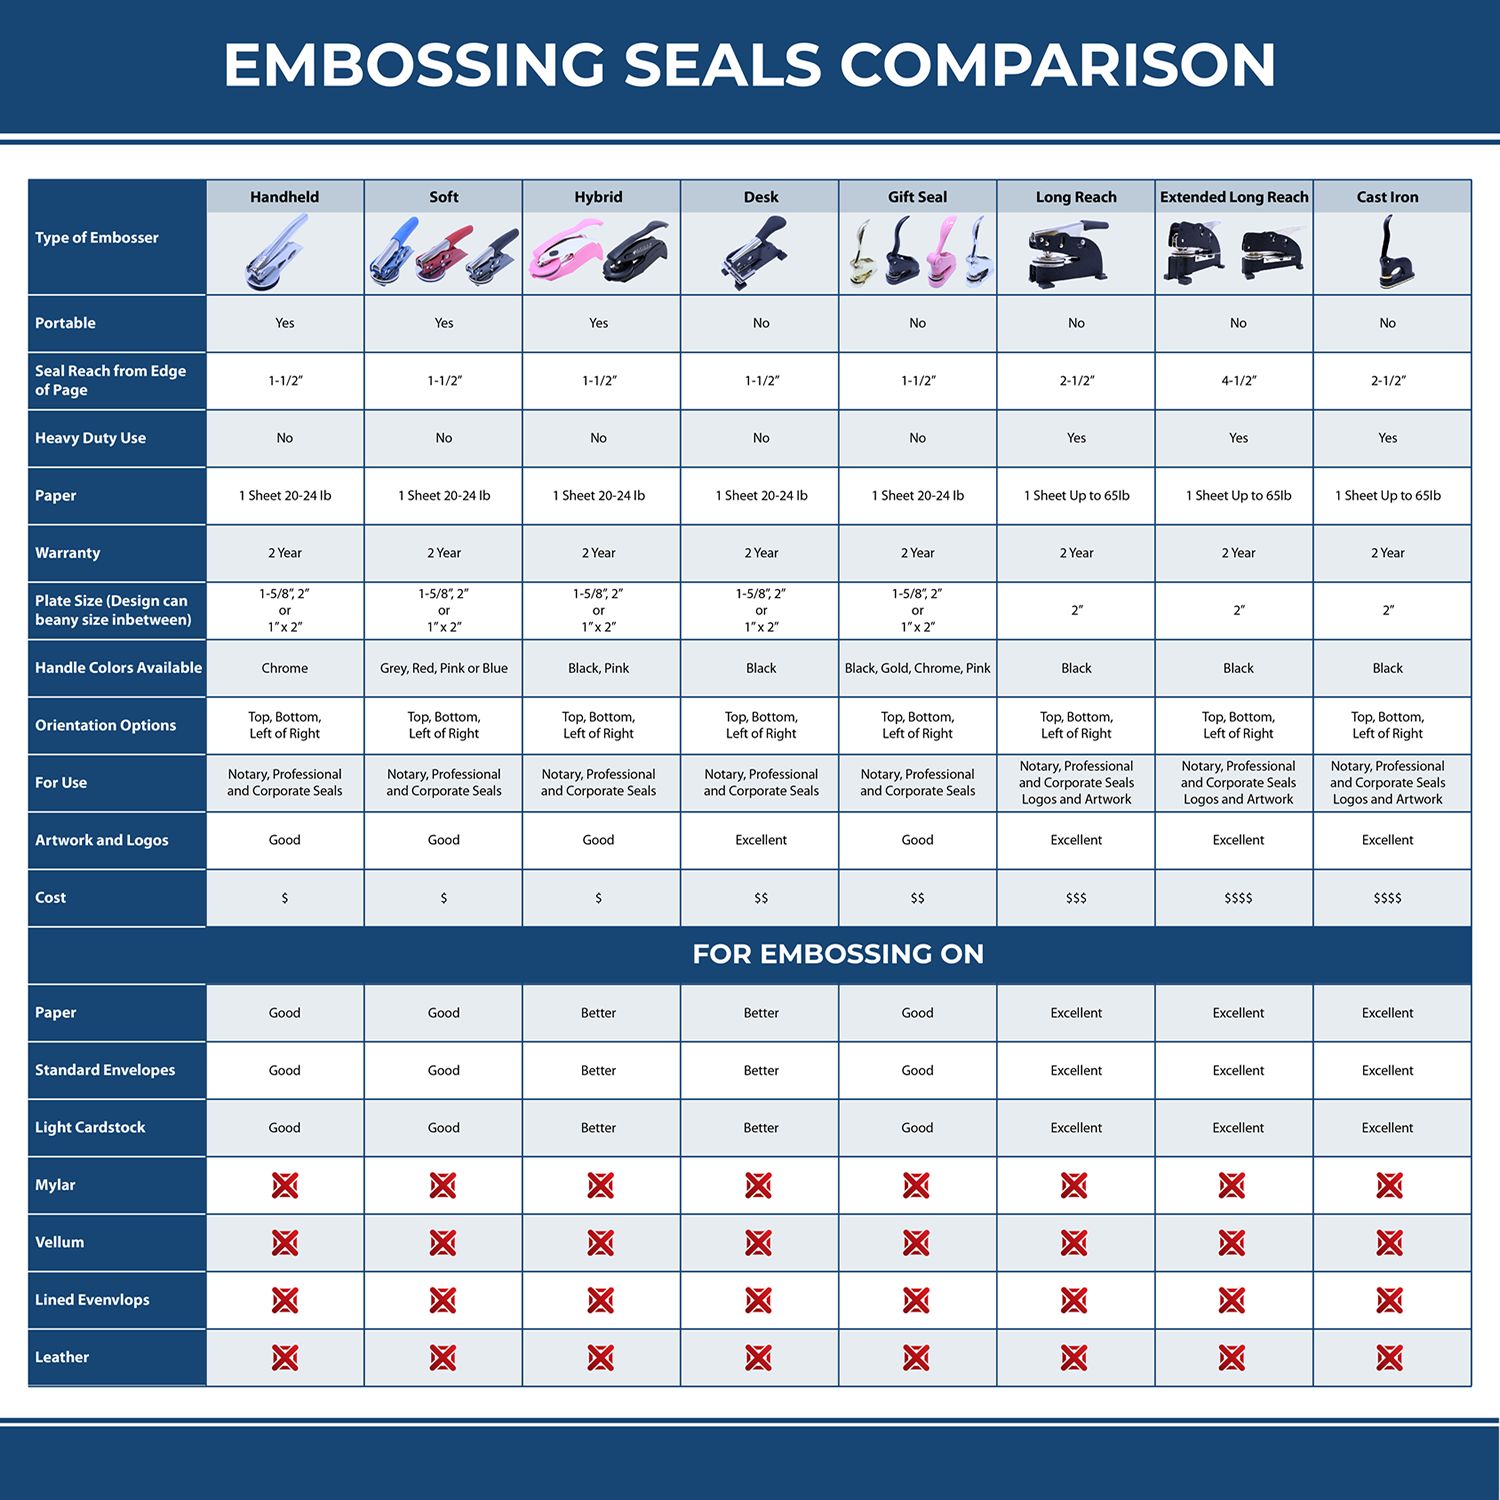 A comparison chart for the different types of mount models available for the Handheld North Carolina Architect Seal Embosser.